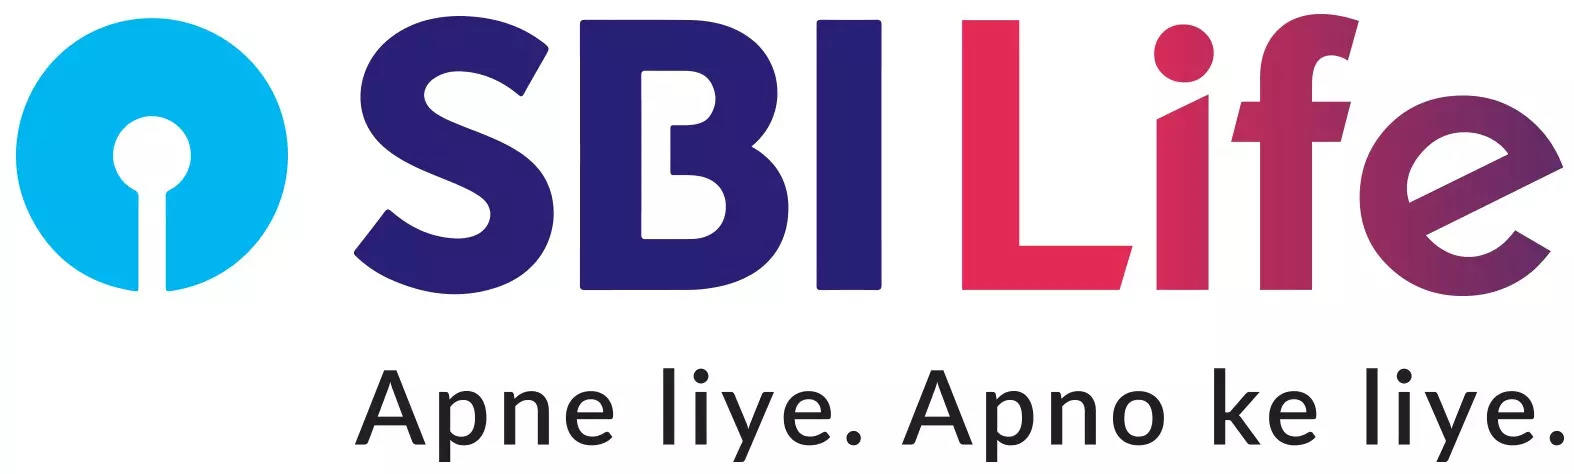 SBI Life Insurance Company Share Price Live Updates: SBI Life Insurance Closes at Rs 1494.90 with 6-Month Beta of 0.67 